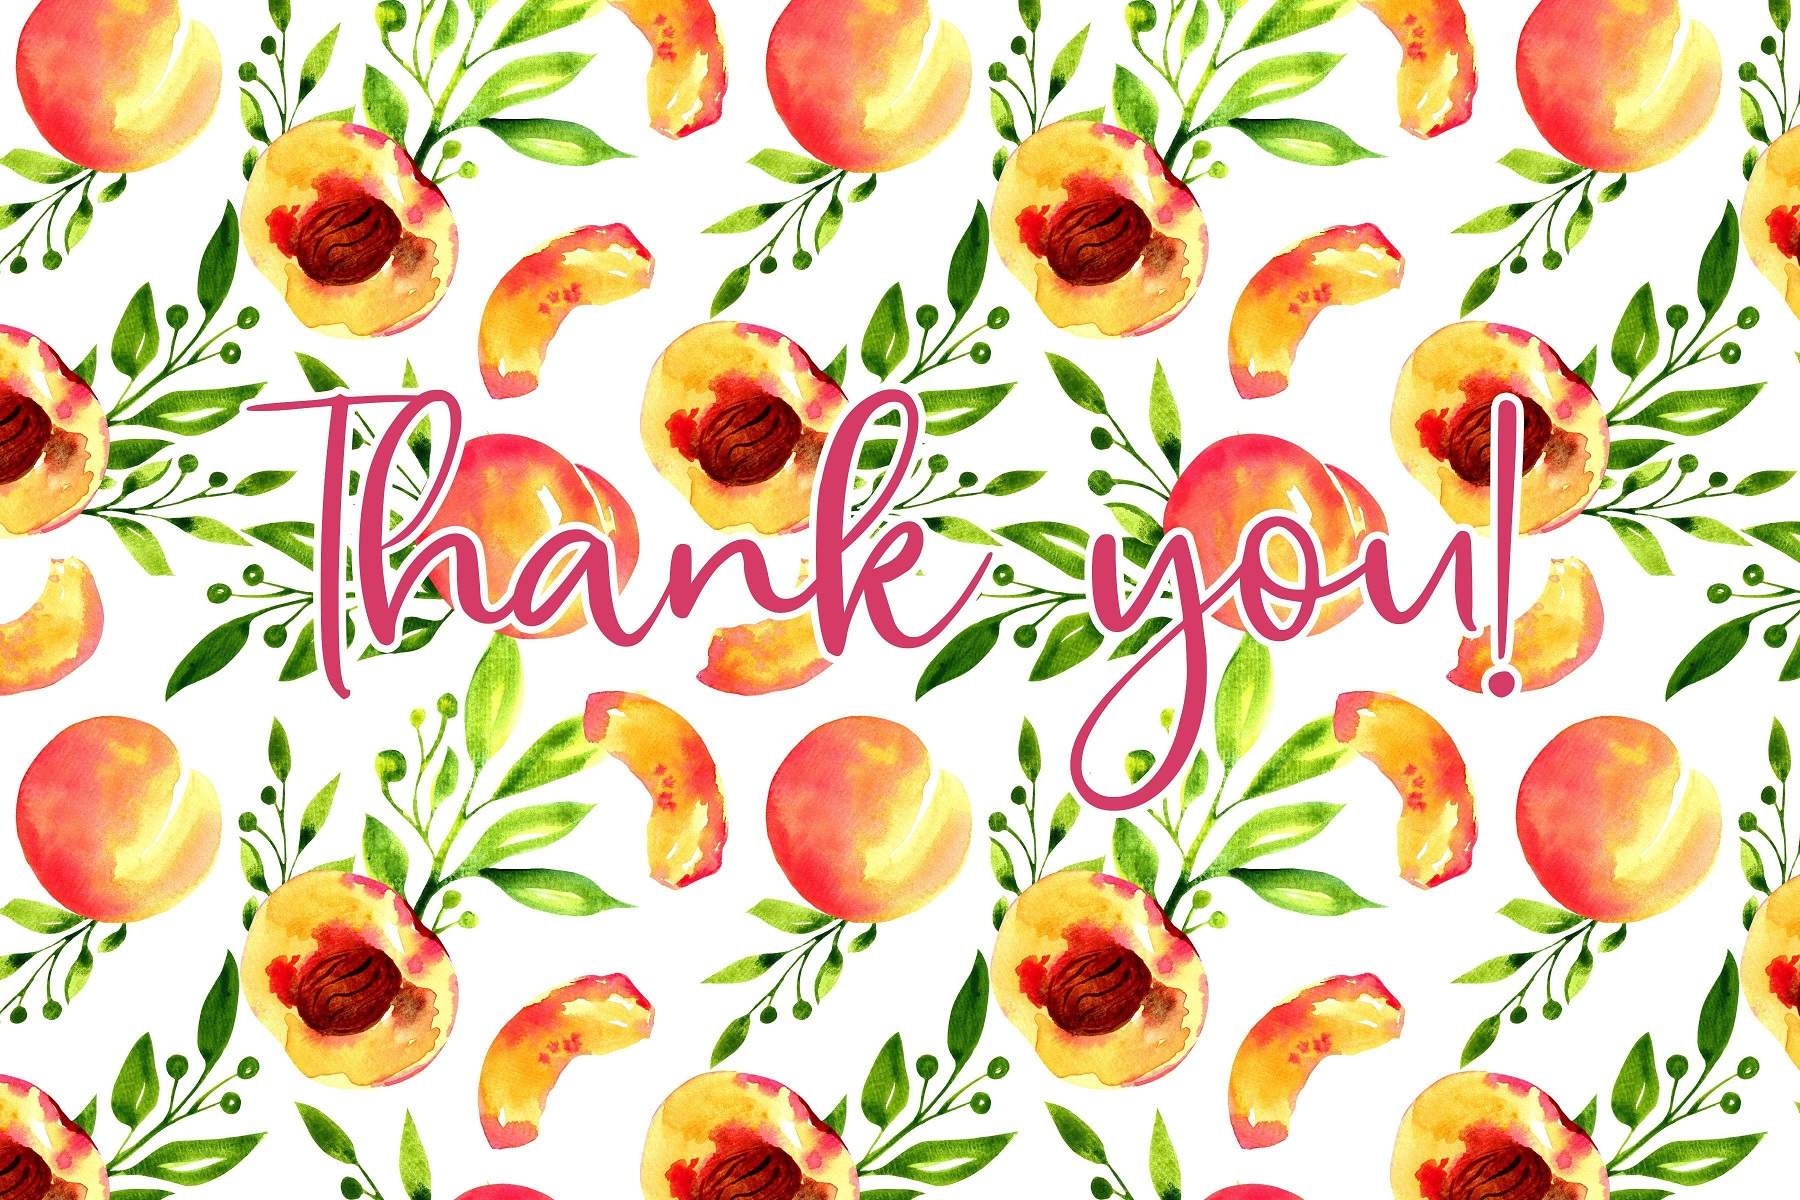 Thank you card with watercolor peaches and leaves.